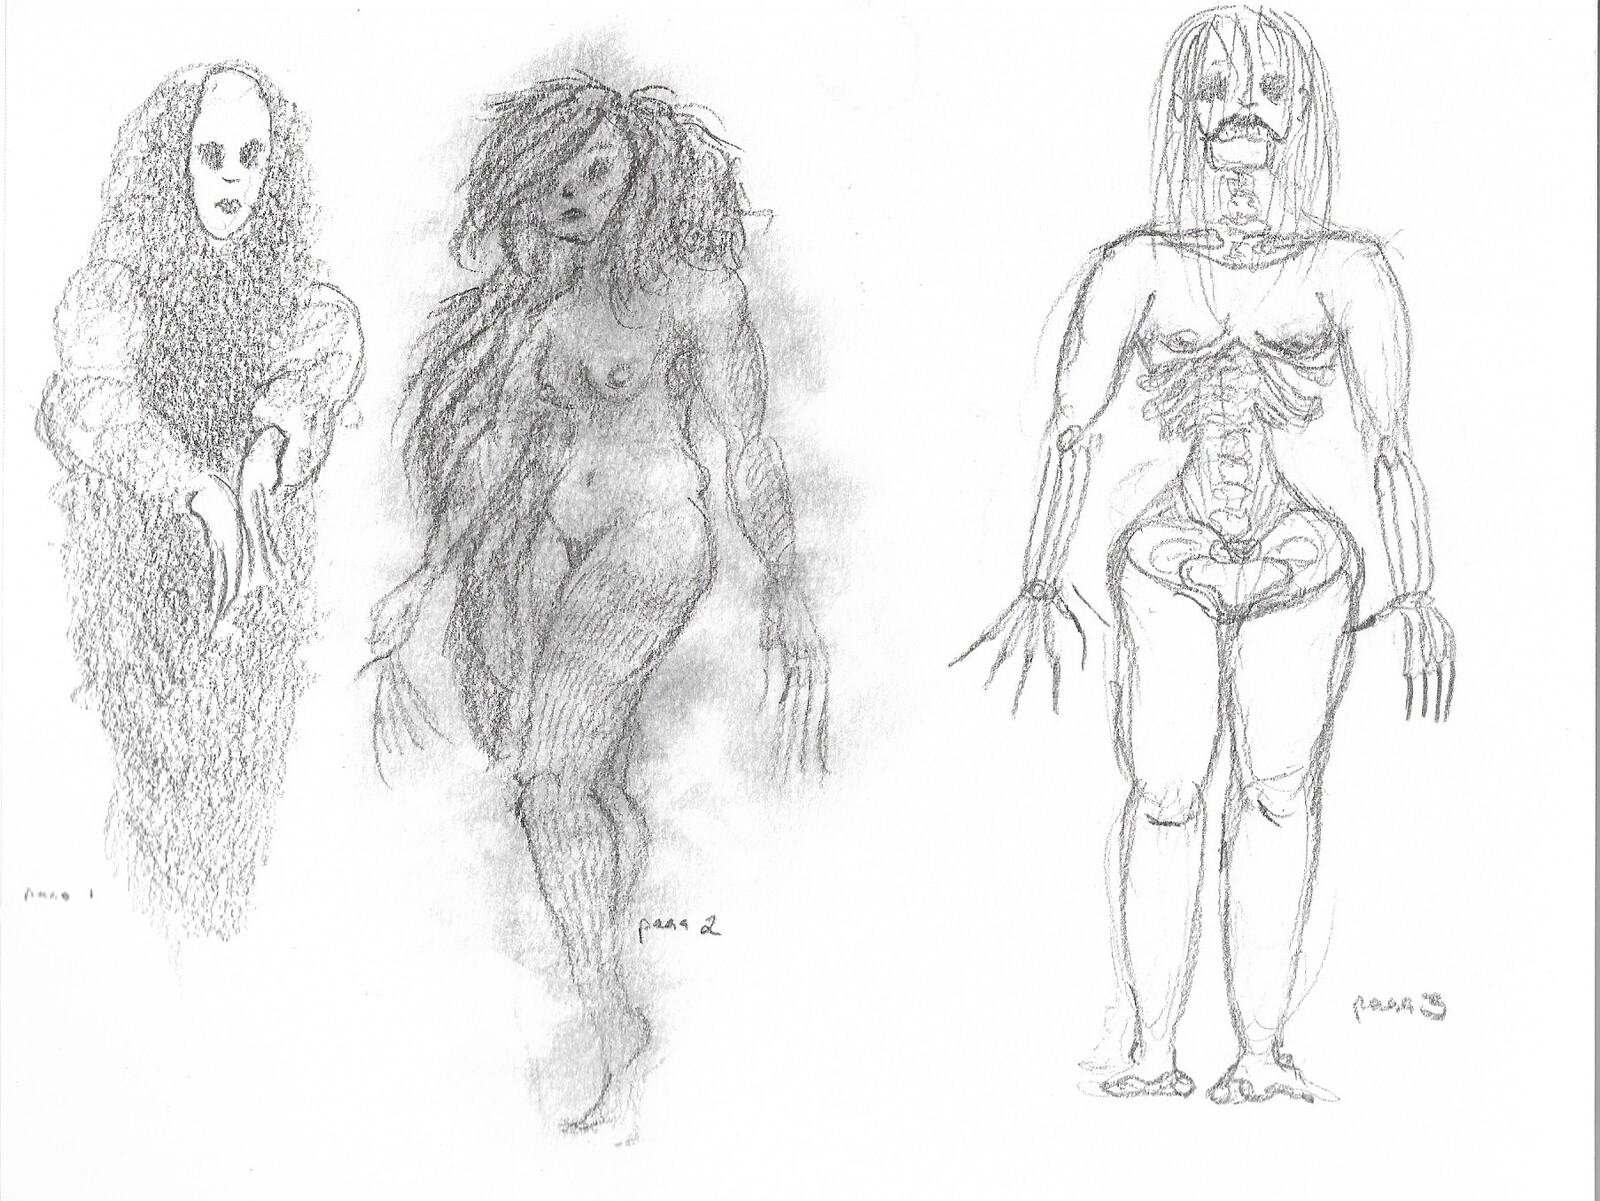 Three initial concepts for Nothing. One inspired by No Face from "Spirited Away", one inspired by Banshees and Lady Godiva, and the third inspired by zombies and reanimated corpses. 